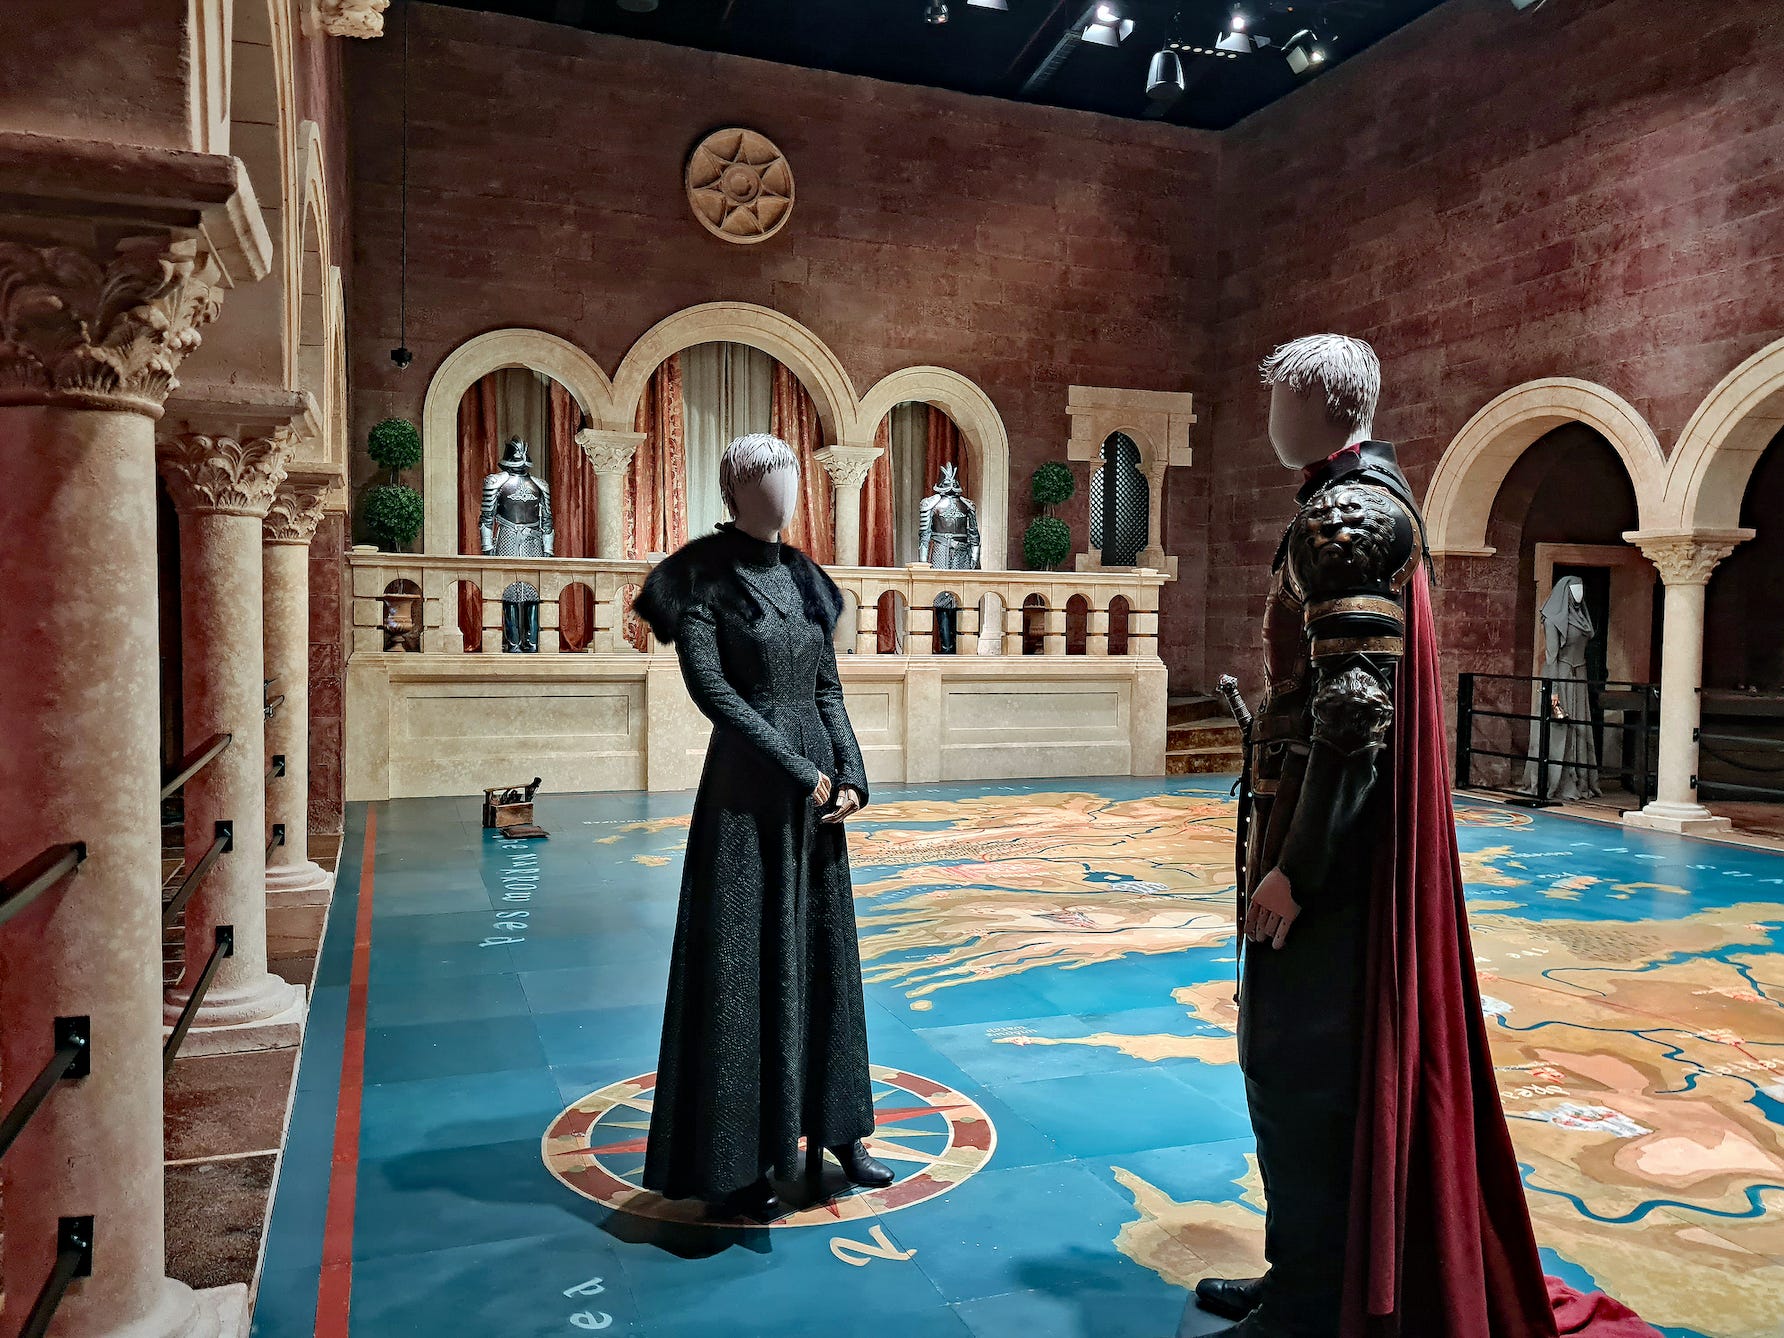 <ul class="summary-list"><li>I recently visited the <a href="https://www.businessinsider.com/game-thrones-studio-tour-iron-throne-hall-of-faces-2022-2">Game of Thrones Studio Tour</a> in Northern Ireland for $37.</li><li>It offers an exclusive look at the <a href="https://www.businessinsider.com/game-of-thrones-prequel-spinoff-plans-timeline-hbo">HBO series</a>, which spent millions of dollars on each episode.</li><li>Even five years after the series finale, the studio is still a worthwhile experience for fans. </li></ul><p>It's been five years since the <a href="https://www.businessinsider.com/game-of-thrones-season-8-finale-analysis-details-recap-2019-5">series finale of HBO's "Game of Thrones,"</a> but I'm as big a fan as ever.</p><p>When a work trip took me to <a href="https://www.businessinsider.com/left-us-for-northern-ireland-these-cultural-differences-surprised-me-2023-9">Northern Ireland</a>, I knew I had to detour to the Game of Thrones Studio Tour. By season eight, the HBO drama was <a href="https://www.businessinsider.com/how-much-game-of-thrones-episodes-cost-for-production-2019-4">spending $15 million per episode</a>, and like any true fan, I wanted a behind-the-scenes look at where some of that money went — and what made the show so visually incredible.</p><p>The tour, located in one of the show's original <a href="https://www.businessinsider.com/living-in-city-where-tv-shows-are-filmed-vancouver-canadian-2024-2">filming locations</a>, Linen Mill Studios, opened in 2022, and standard tickets cost £29.50, or about $37.</p><p>I wanted to see just how relevant the studio is today — especially in the lead-up to the new season of the <a href="https://www.businessinsider.com/house-of-the-dragon-season-2-trailer-release-date-cast">"House of the Dragon"</a> prequel series in June — and if the widespread passion of the fandom is still alive.</p><div class="read-original">Read the original article on <a href="https://www.businessinsider.com/game-of-thrones-studio-tour-northern-ireland-still-worth-it-2024-4">Business Insider</a></div>